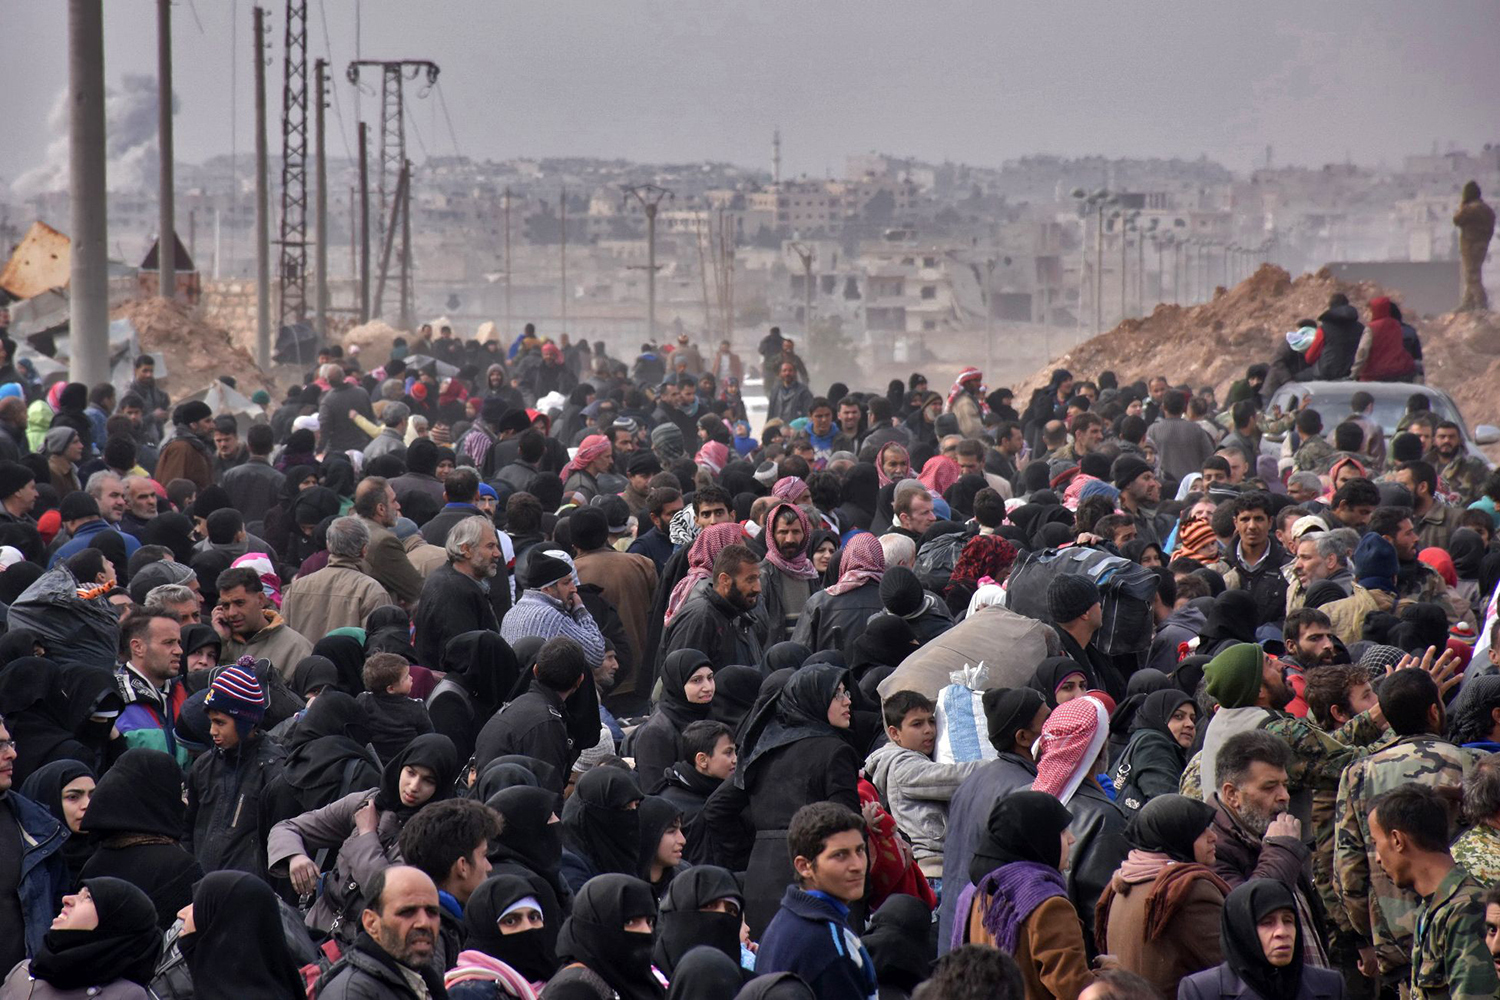 TOPSHOT - Syrian families, fleeing from various eastern districts of Aleppo, queue to get onto governmental buses on November 29, 2016 in the government-held eastern neighbourhood of Jabal Badro, before heading to government-controlled western Aleppo, as the Syrian government offensive to recapture rebel-held Aleppo has prompted an exodus of civilians. The Syrian government offensive to recapture rebel-held Aleppo sparked international alarm, with the UN saying nearly 16,000 people had fled the assault and more could follow. The fighting has prompted an exodus of terrified civilians, many fleeing empty-handed into remaining rebel-held territory, or crossing into government-controlled western Aleppo or Kurdish districts. / AFP PHOTO / George OURFALIAN / TT / kod 444